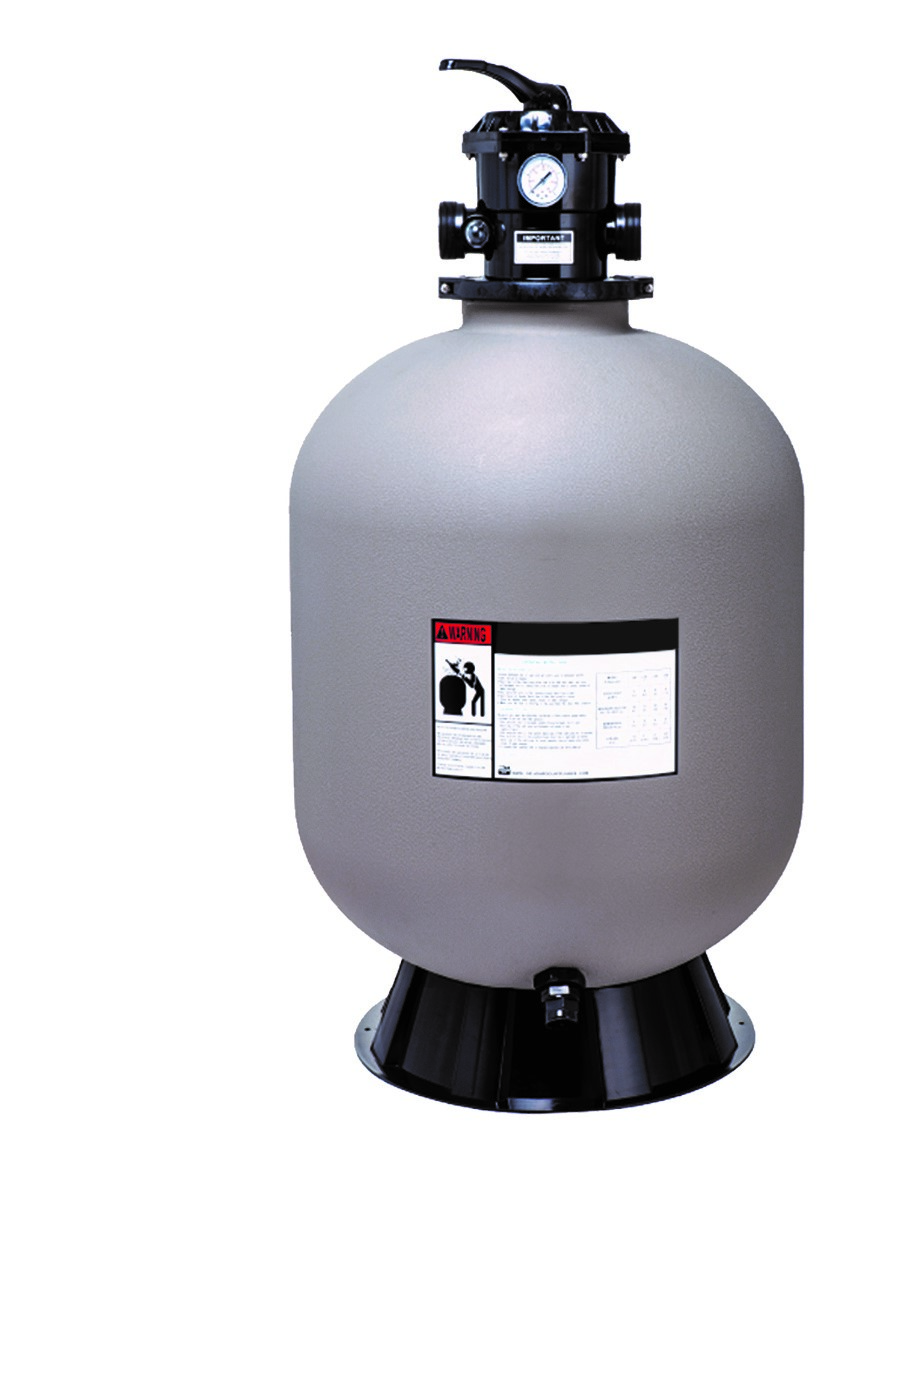 CIPU - Top mount Sand Filters - 31 inch